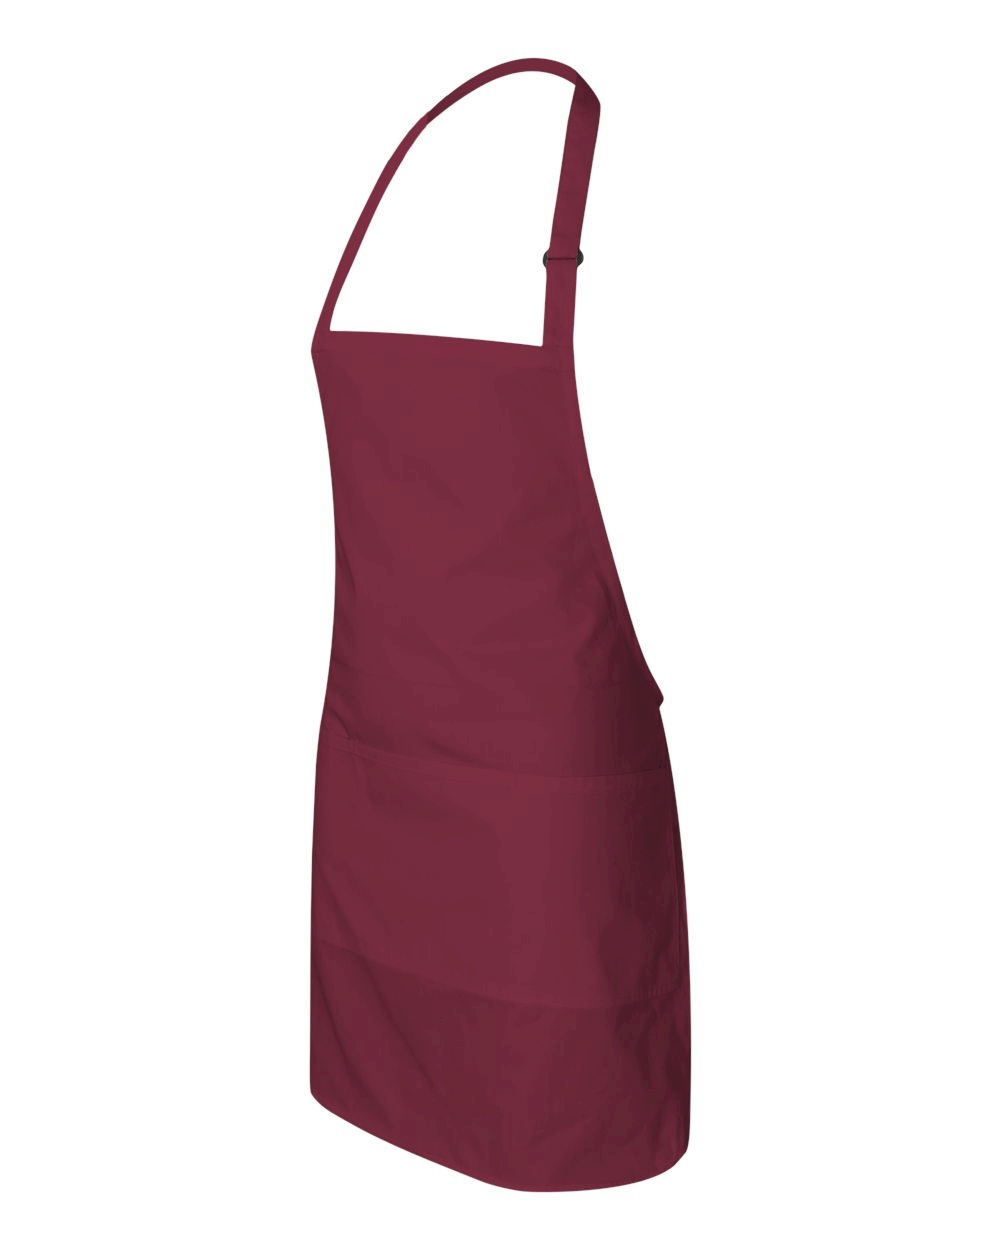 Full Apron Embroidery Blanks - FRENCH MERLOT